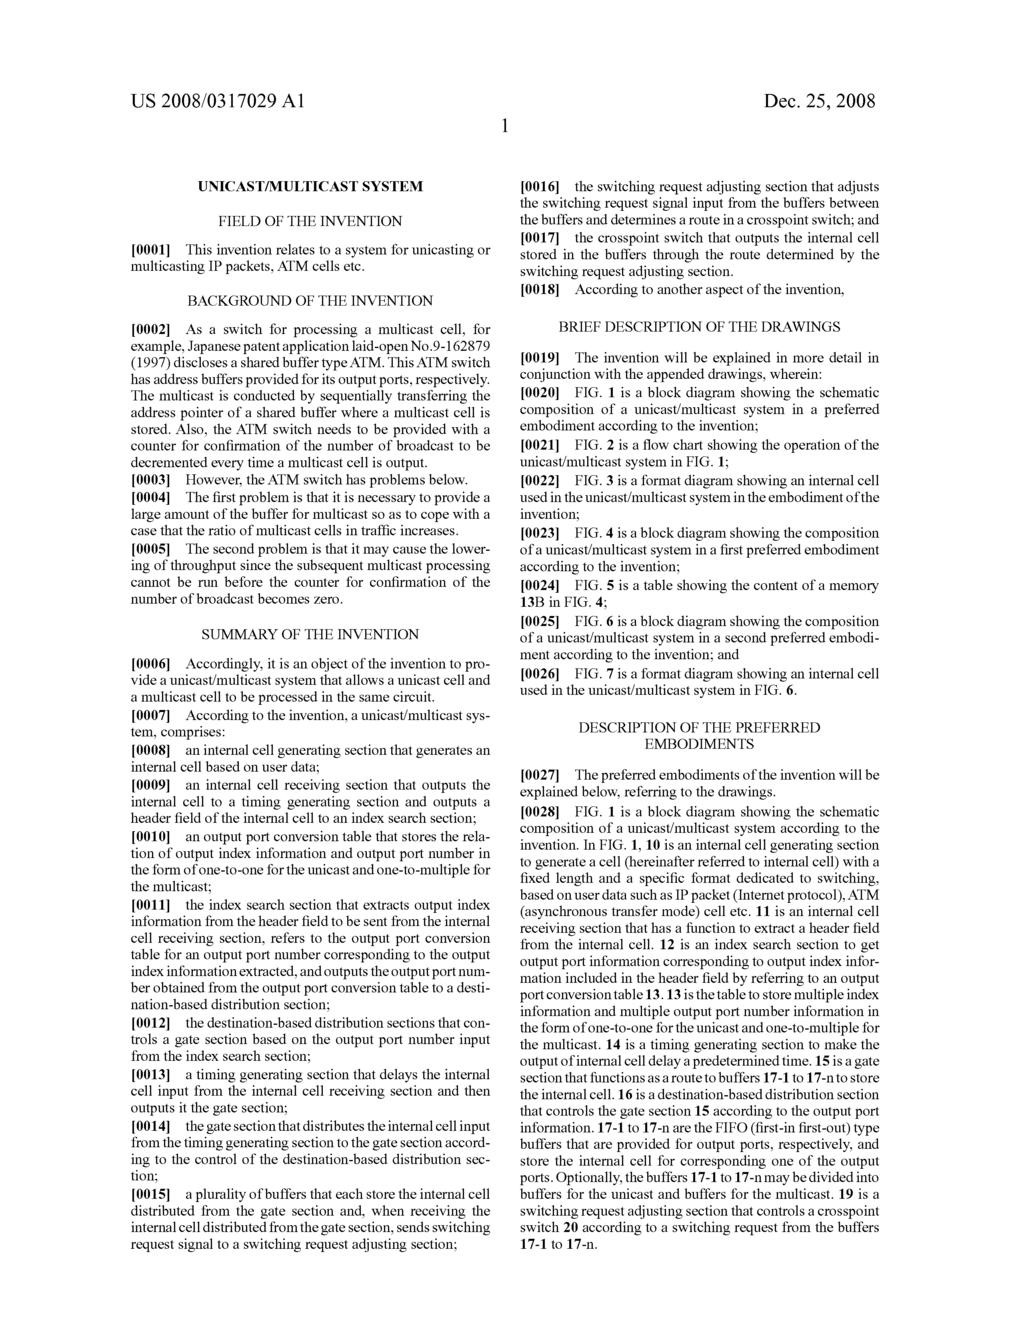 US 2008/0317029 A1 Dec. 25, 2008 UNICAST/MULTICAST SYSTEM FIELD OF THE INVENTION 0001. This invention relates to a system for unicasting or multicasting IP packets, ATM cells etc.